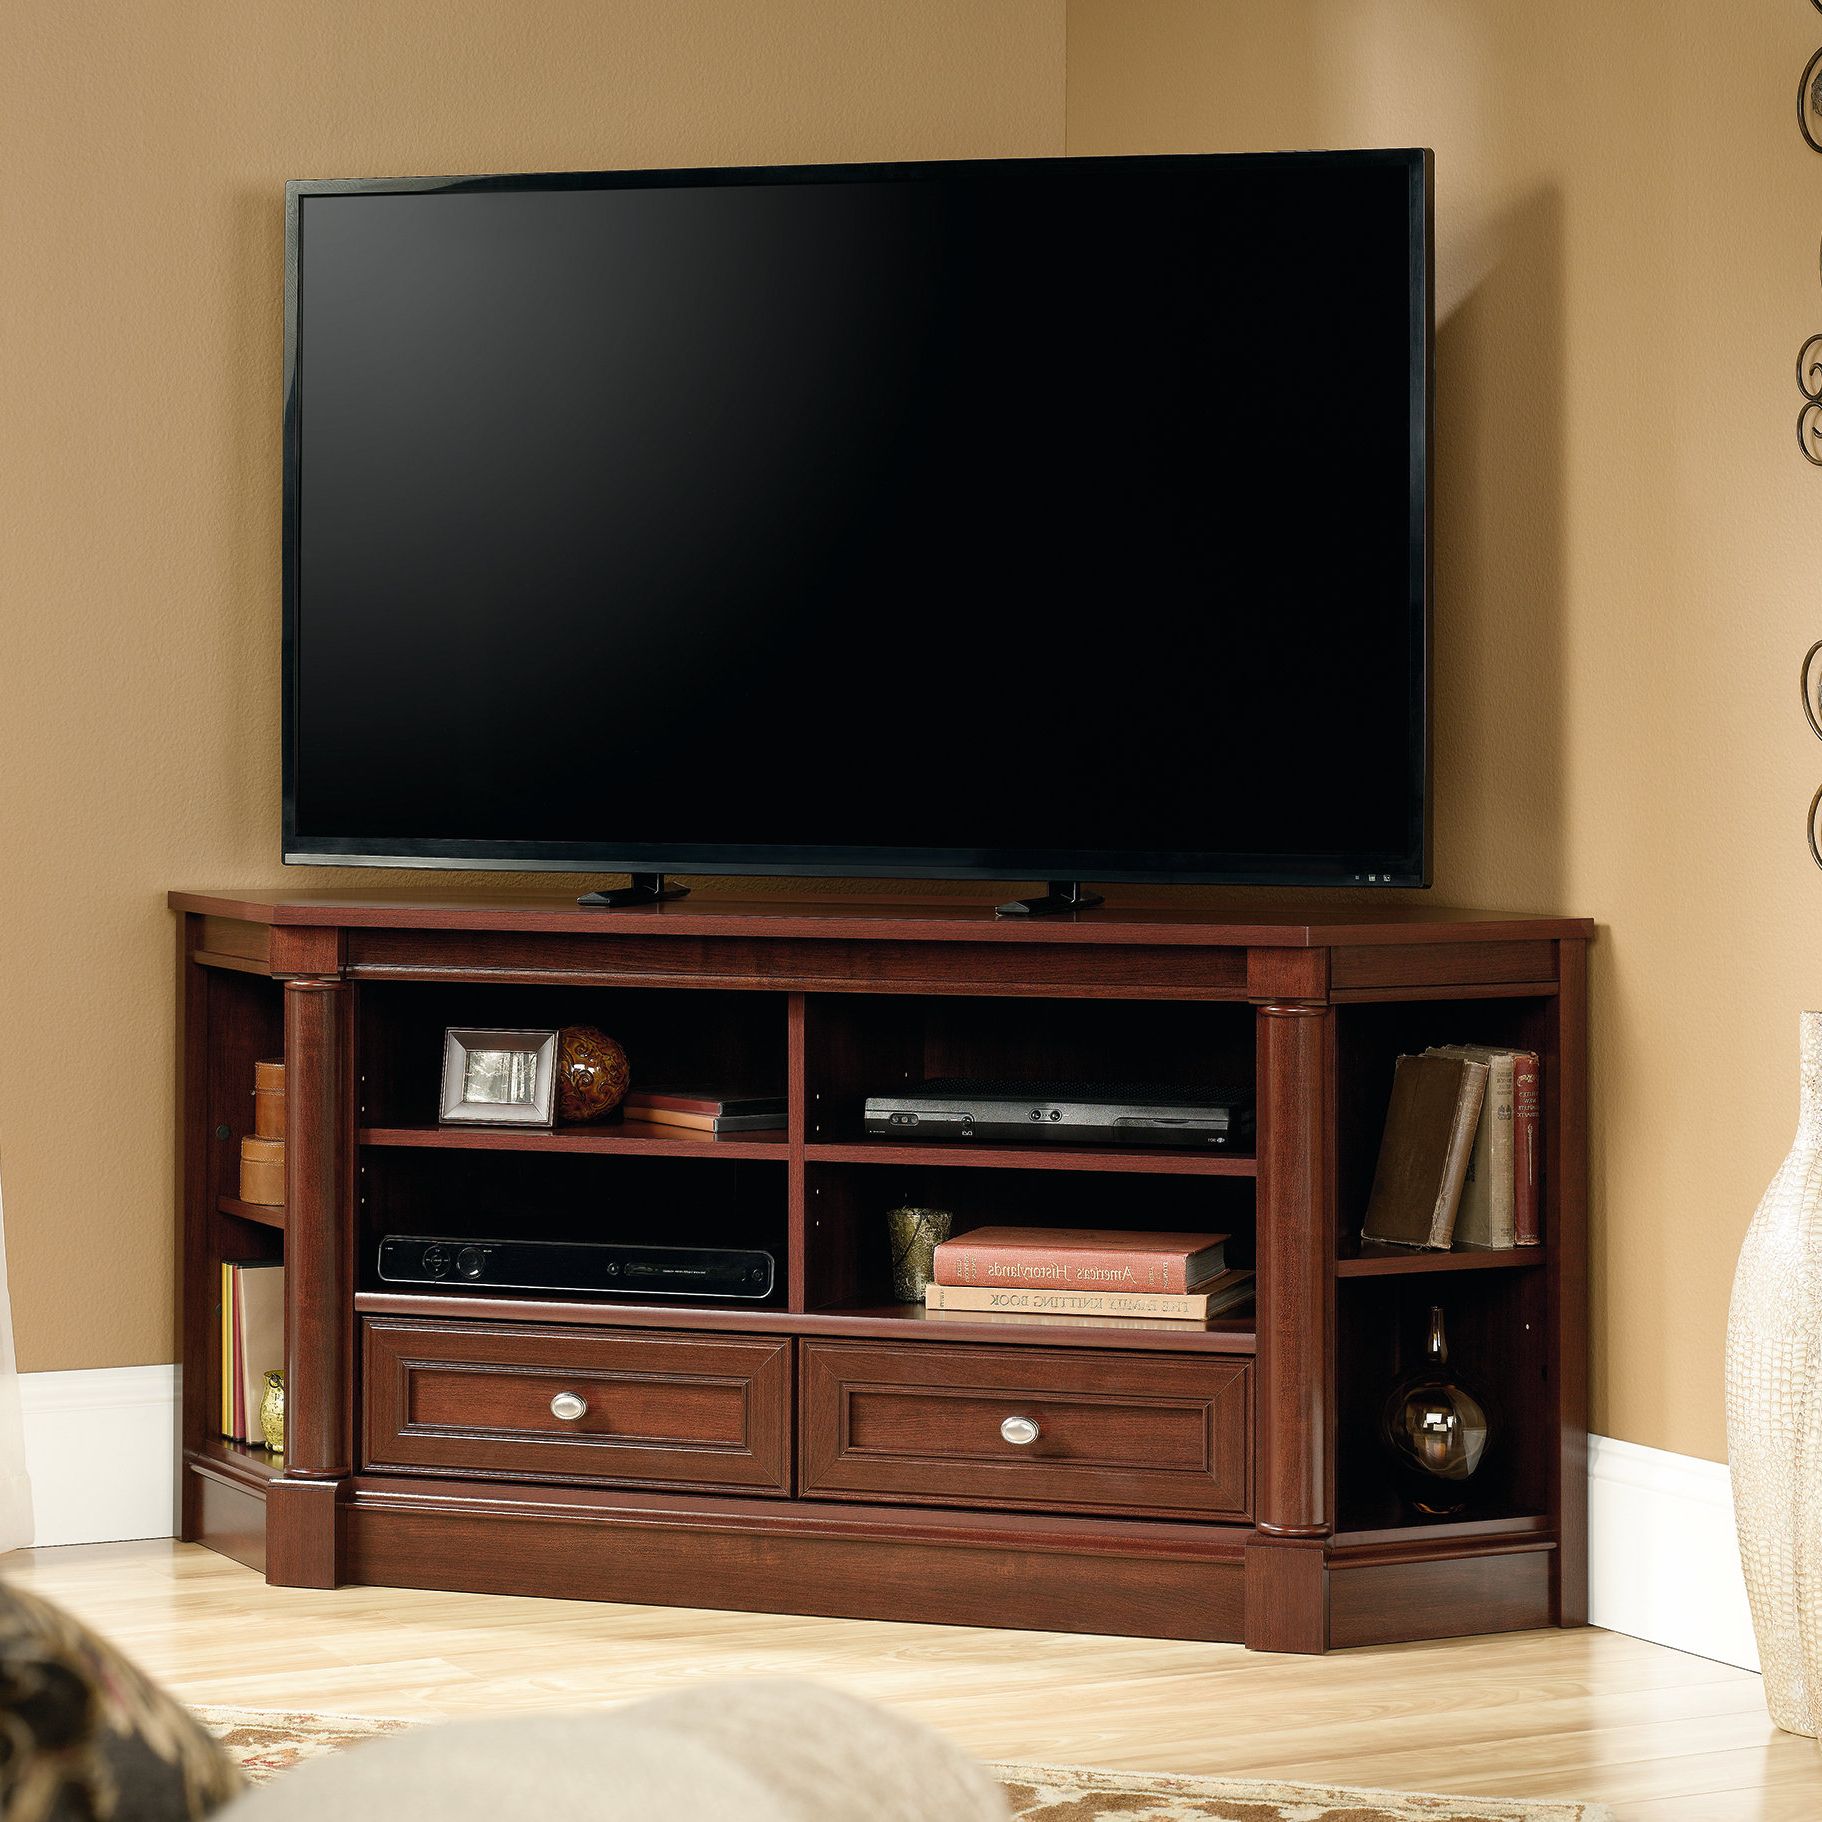 2020 Best of Corner Tv Stands For 60 Inch Flat Screens